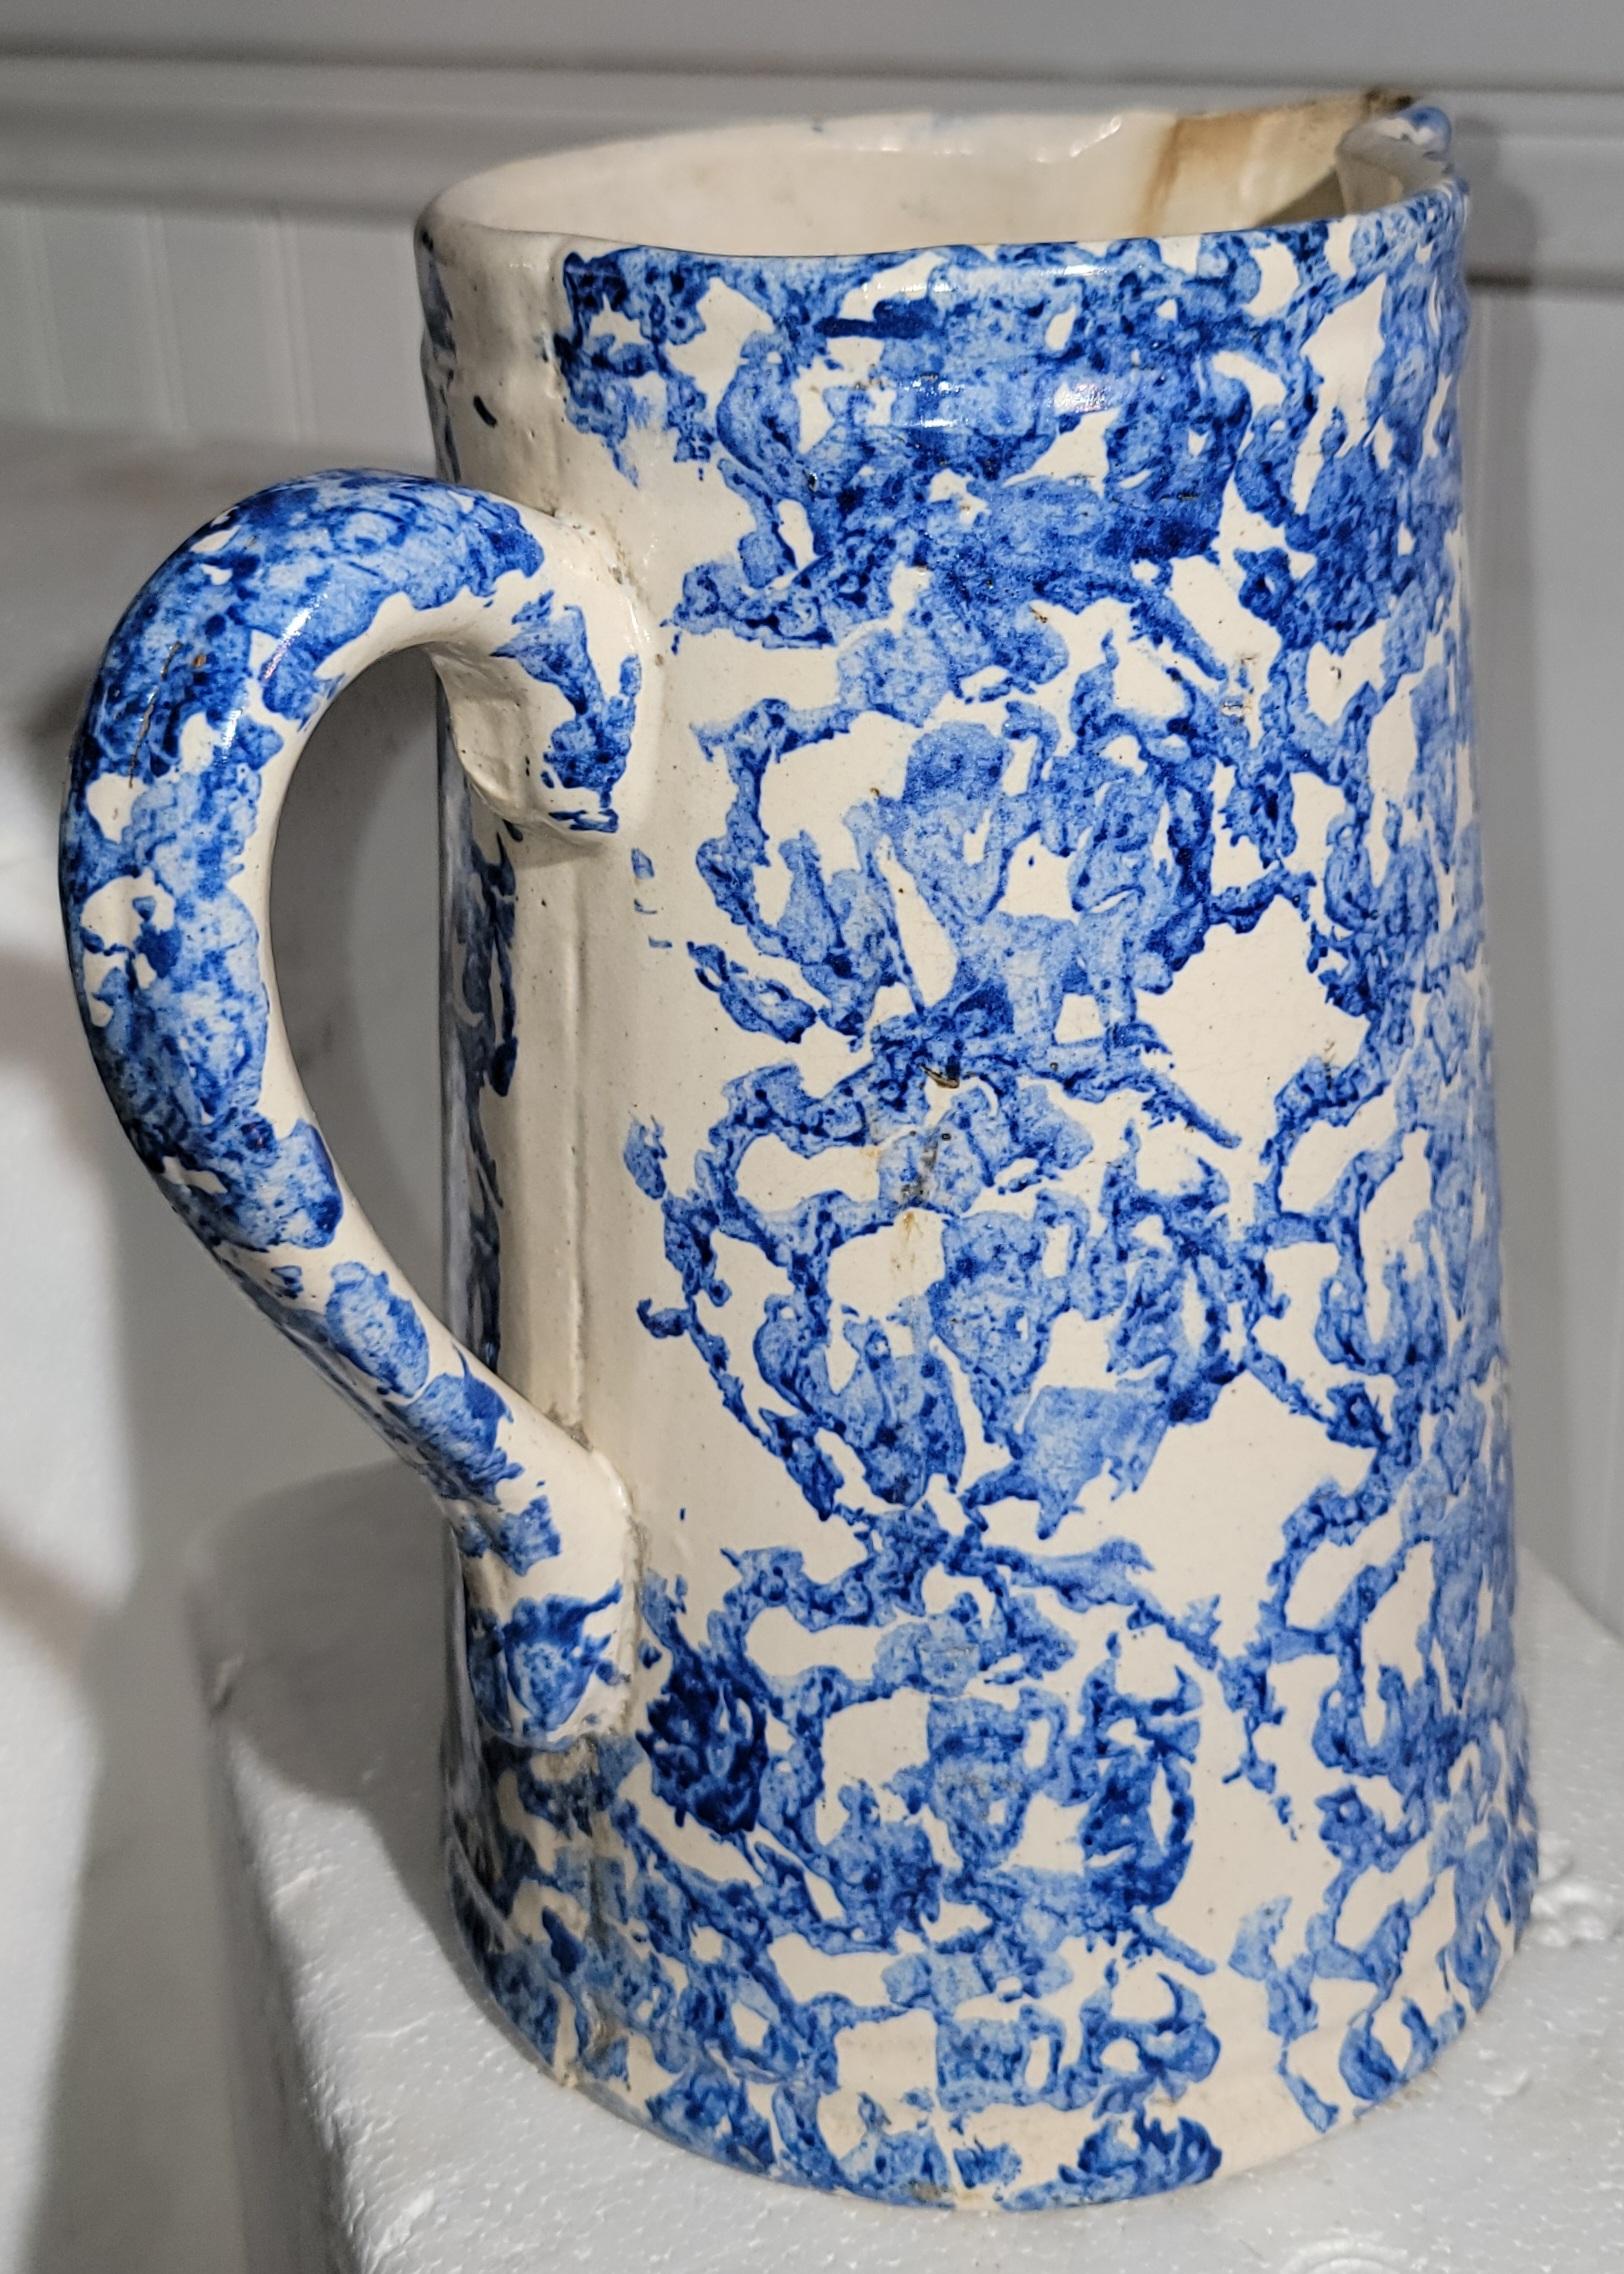 Hand-Crafted 19Thc Hand Crafted Sponge Ware Pitcher For Sale